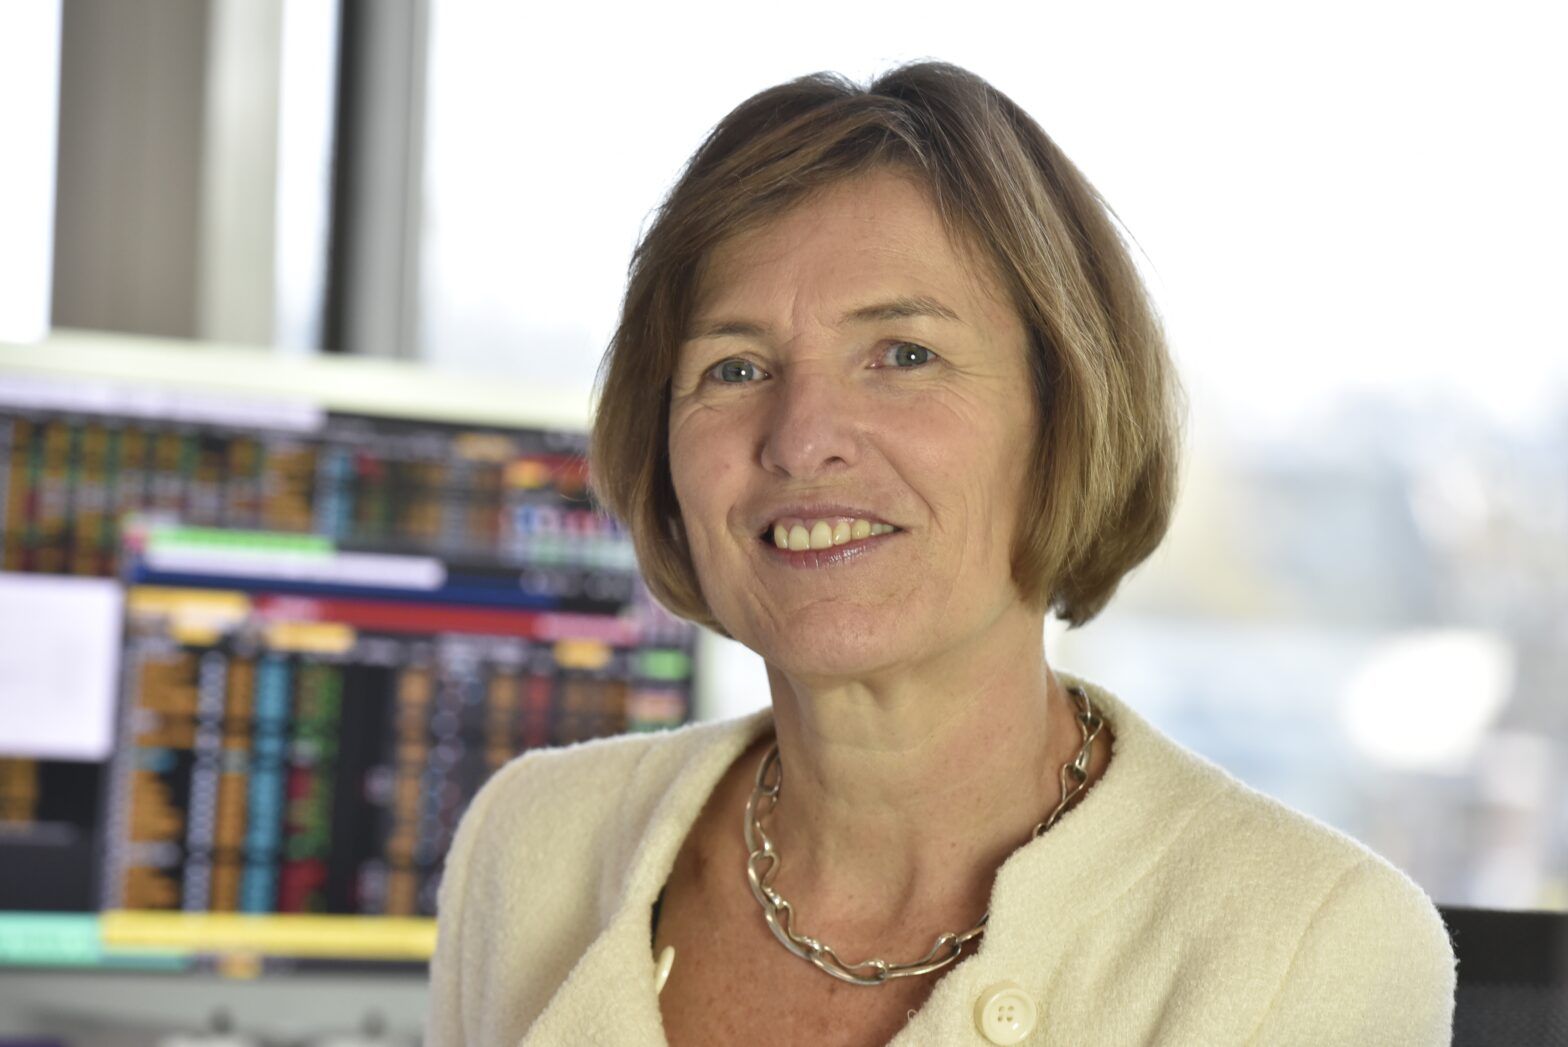 Former central bank CIO joins NN Investment Partners